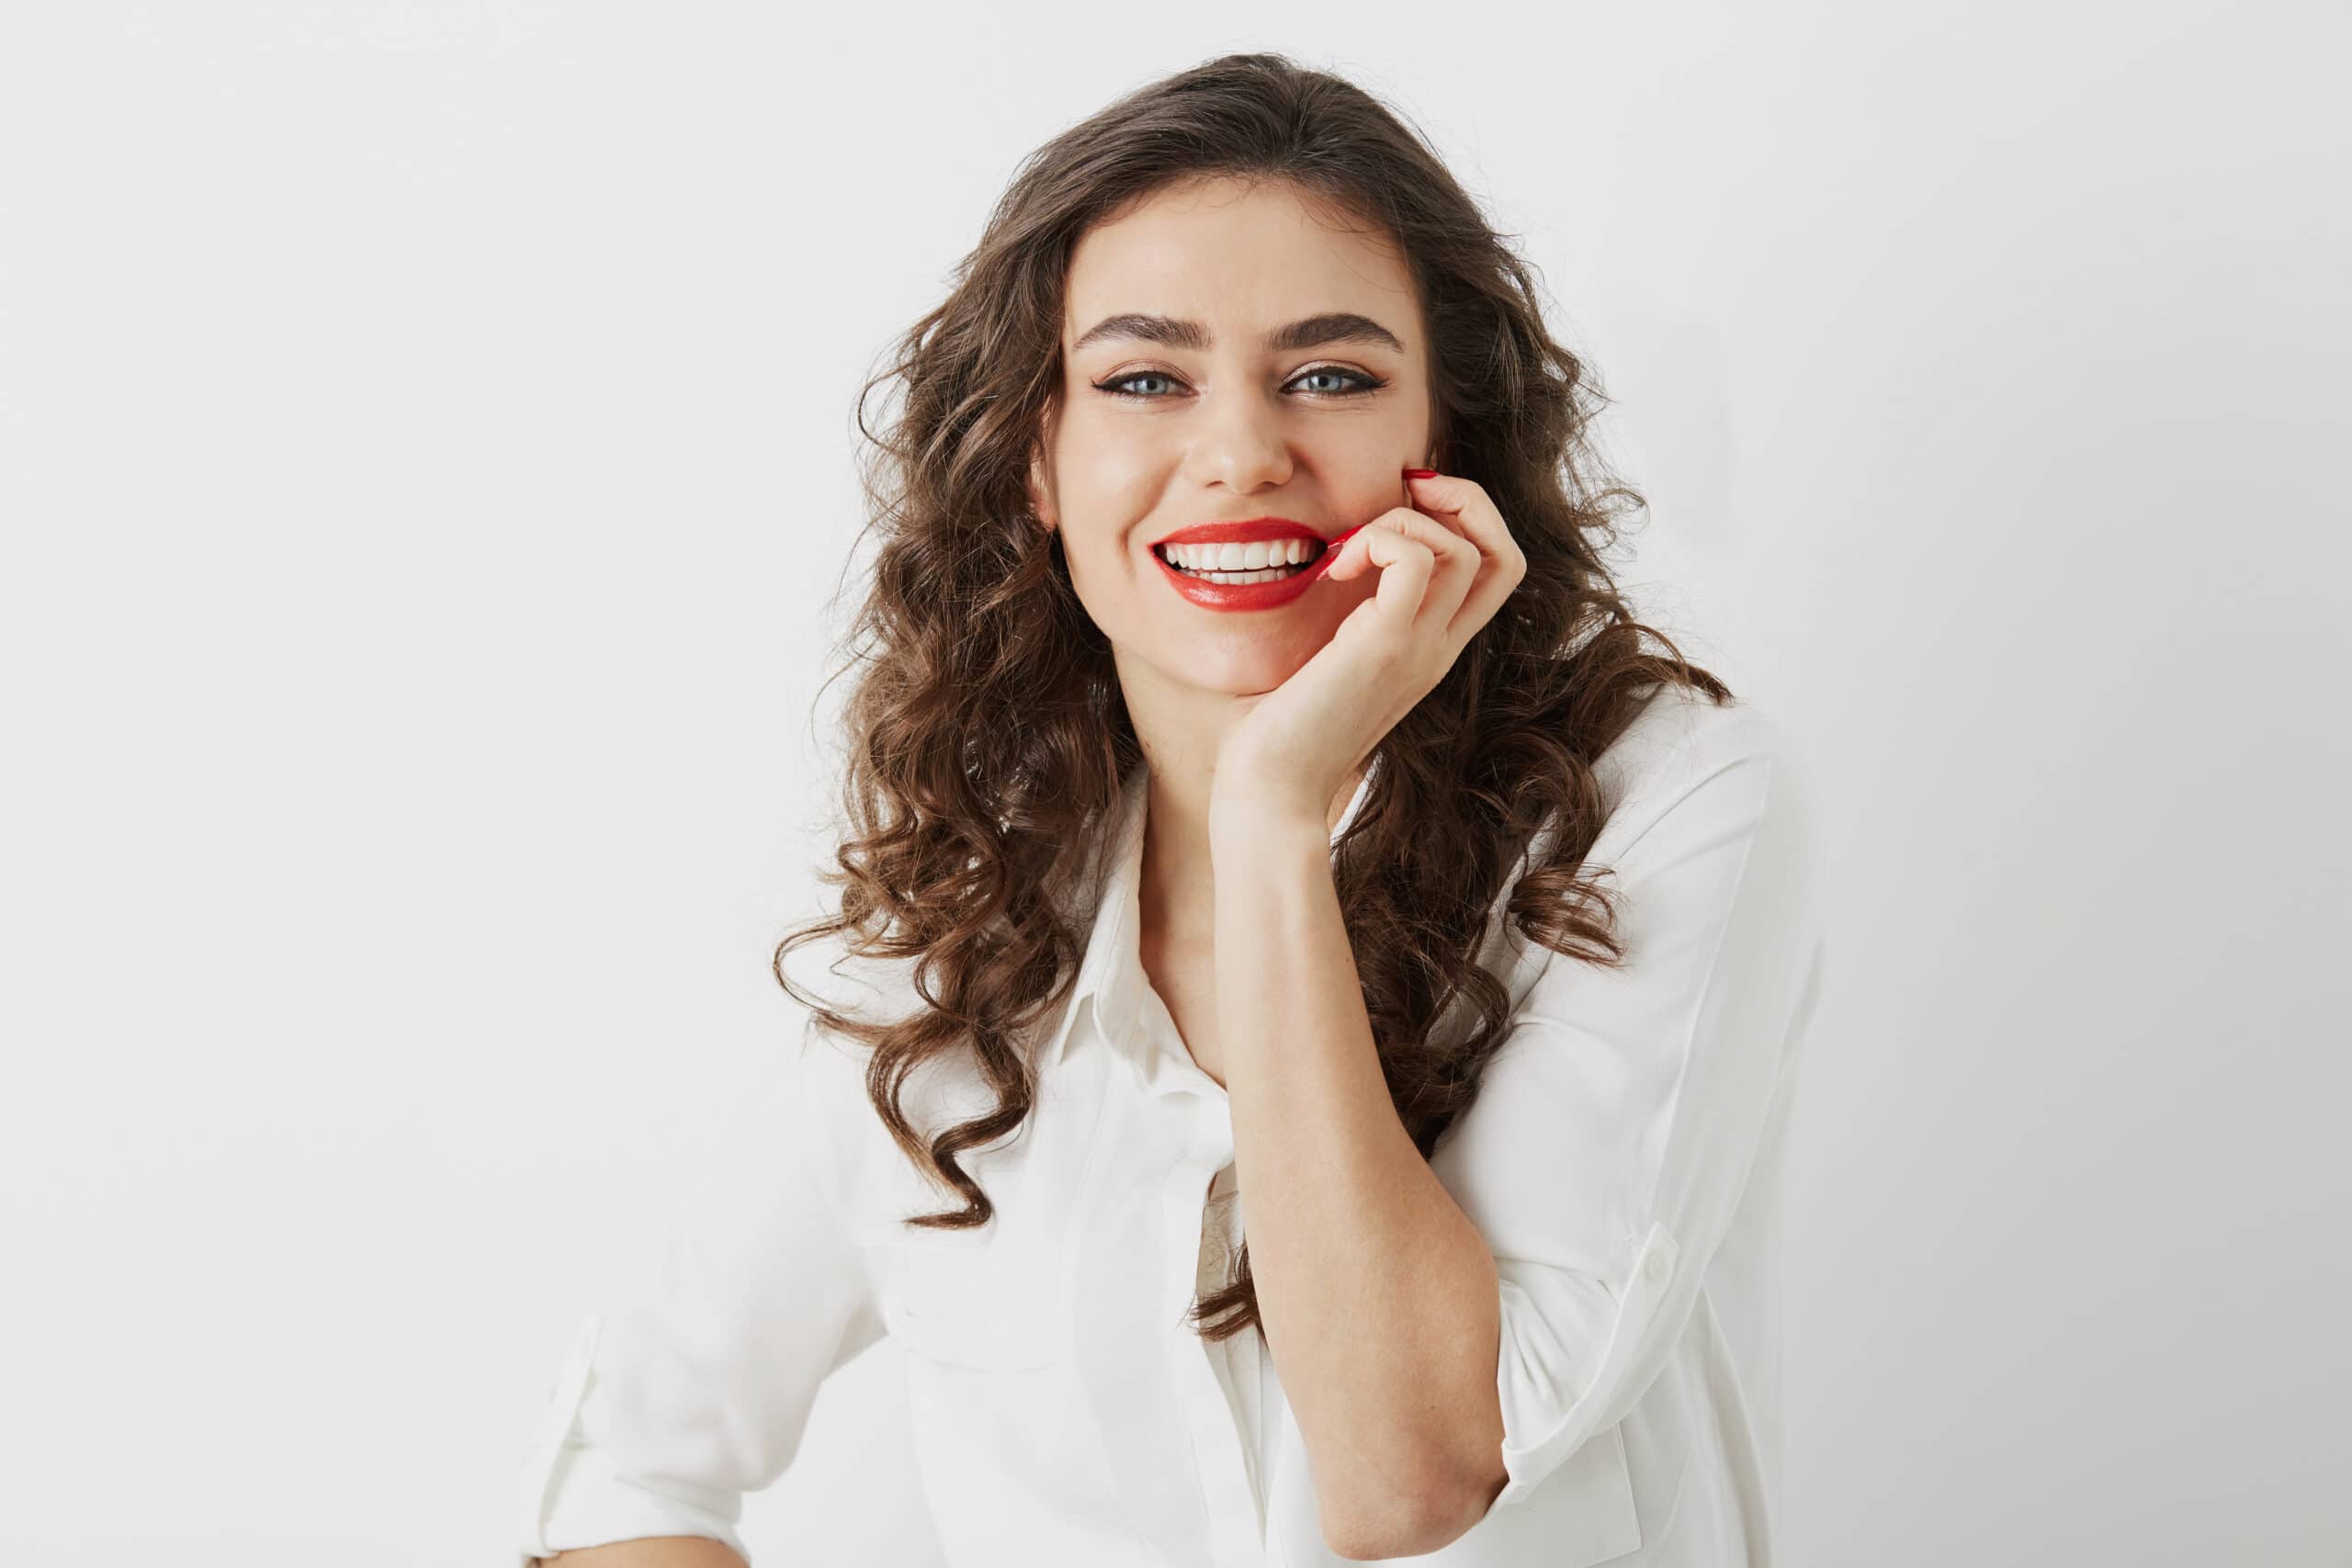 close up portrait of candid smiling attractive woman with white teeth looking in camera isolated, long curly hair, white blouse, elegant business style, happy positive emotion, red lipstick make-up